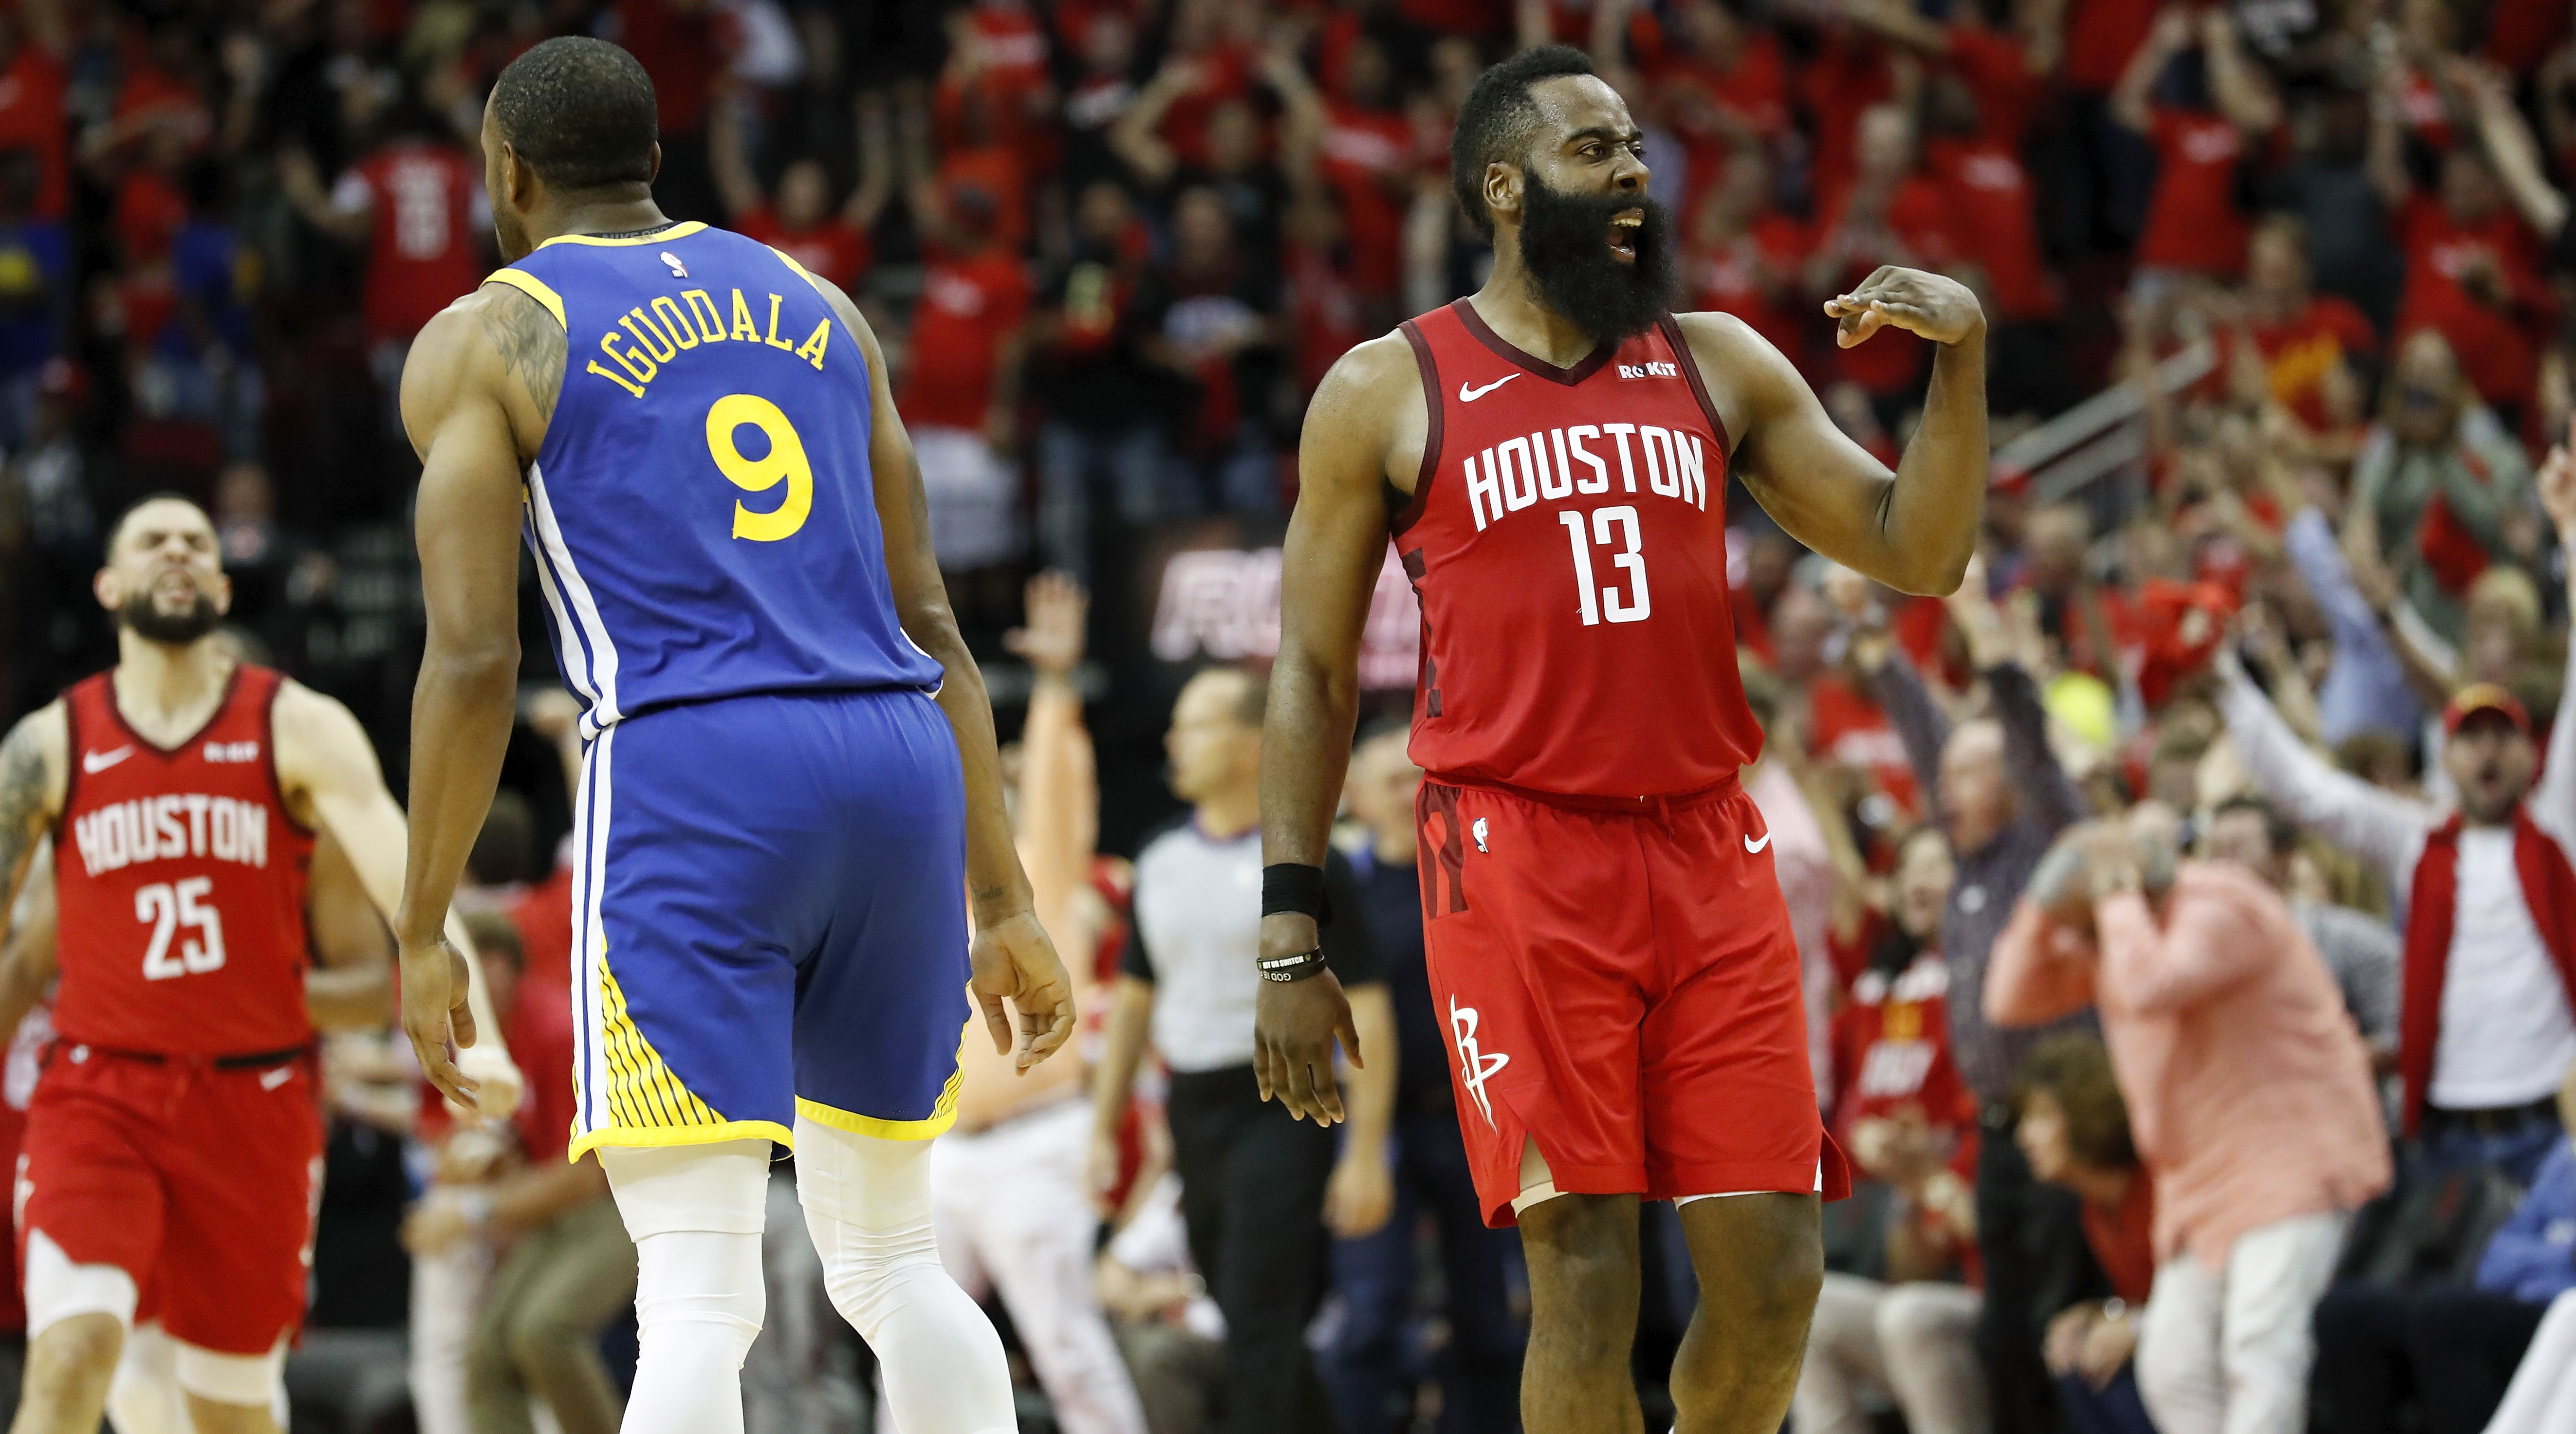 Warriors interested in Rockets' James Harden? Highly unlikely